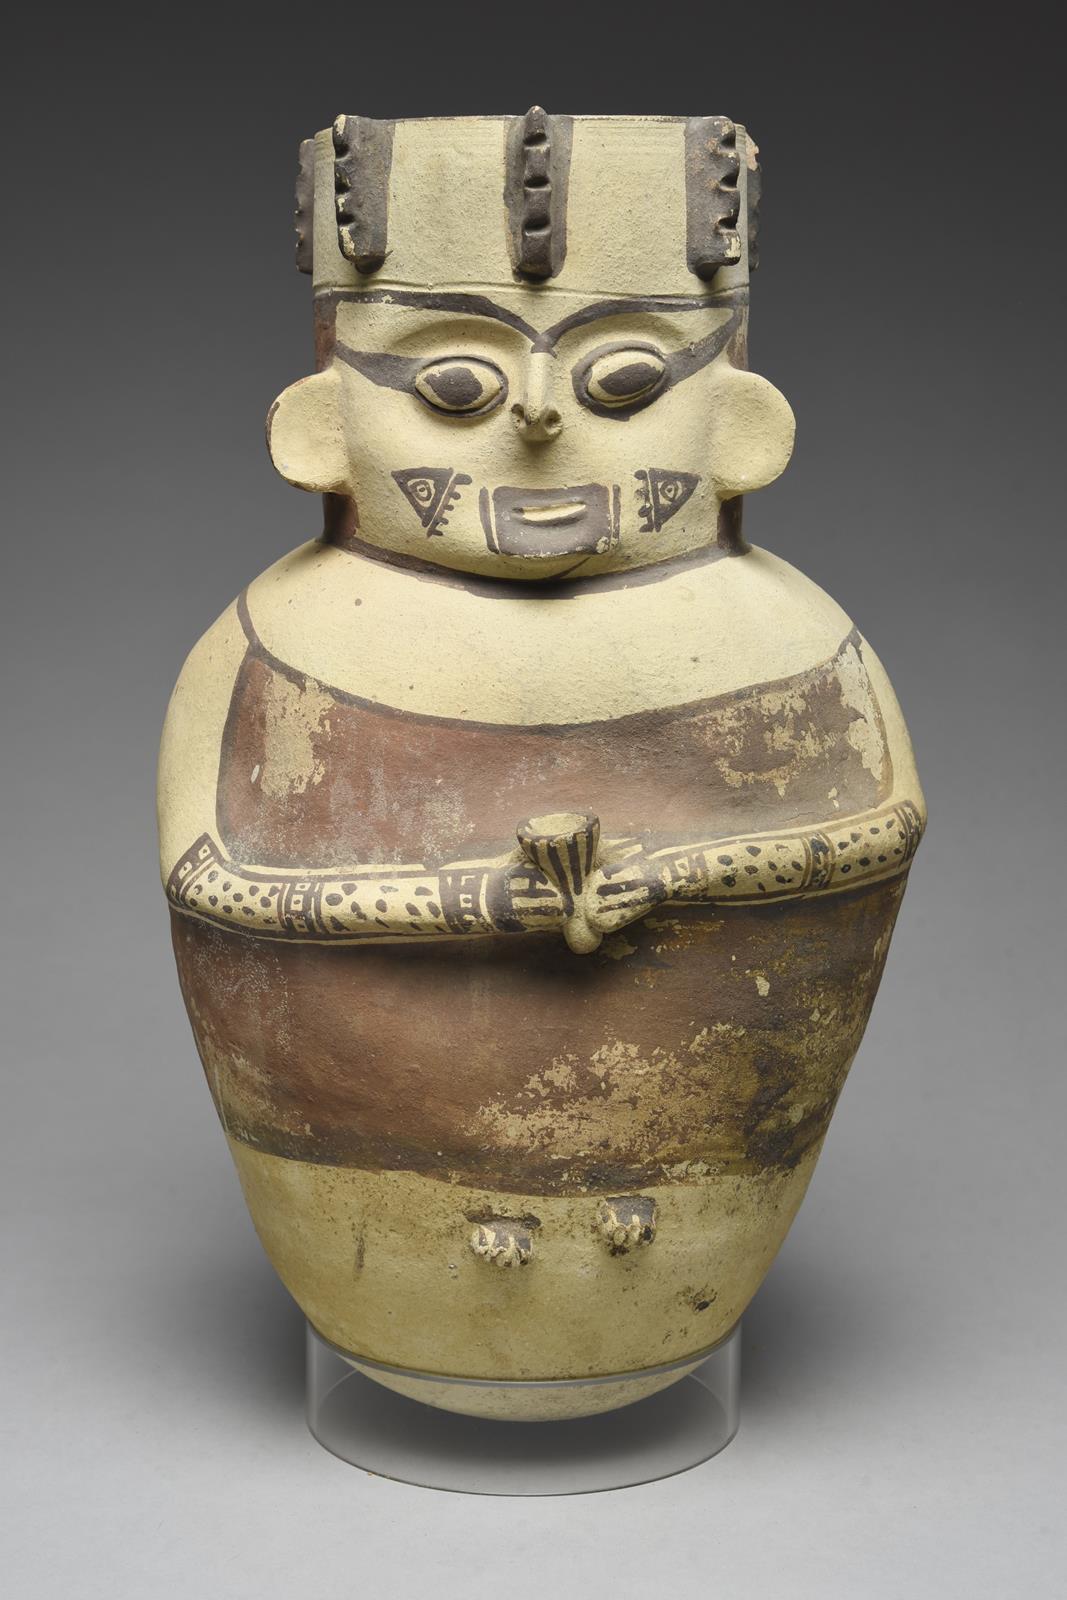 A Chancay figural vessel Peru, circa 1100 - 1400 AD pottery, relief modelled holding a cup, with a